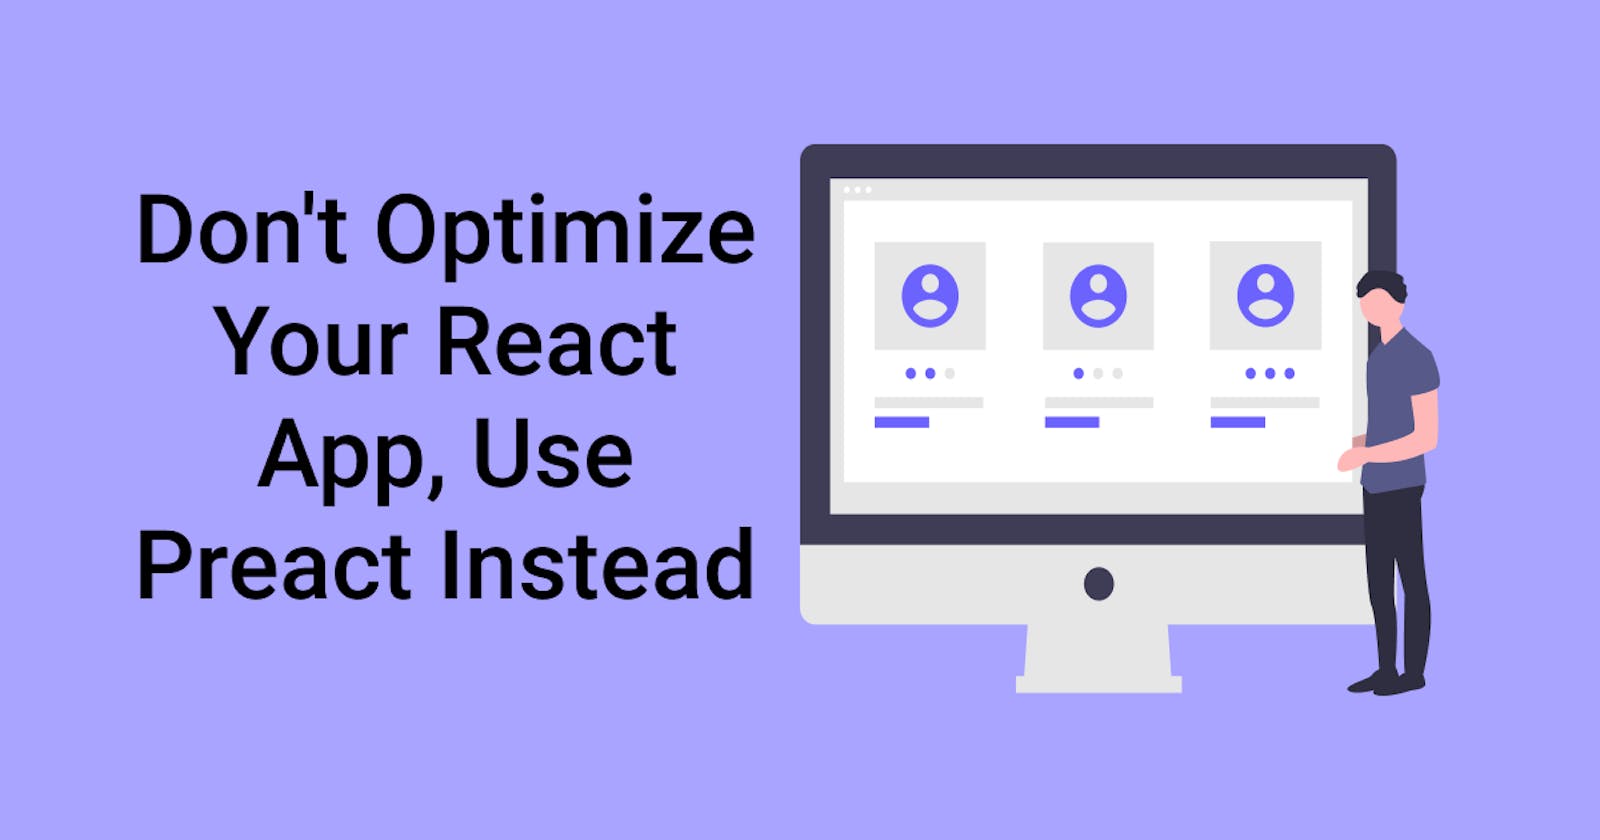 Don't Optimize Your React App, Use Preact Instead